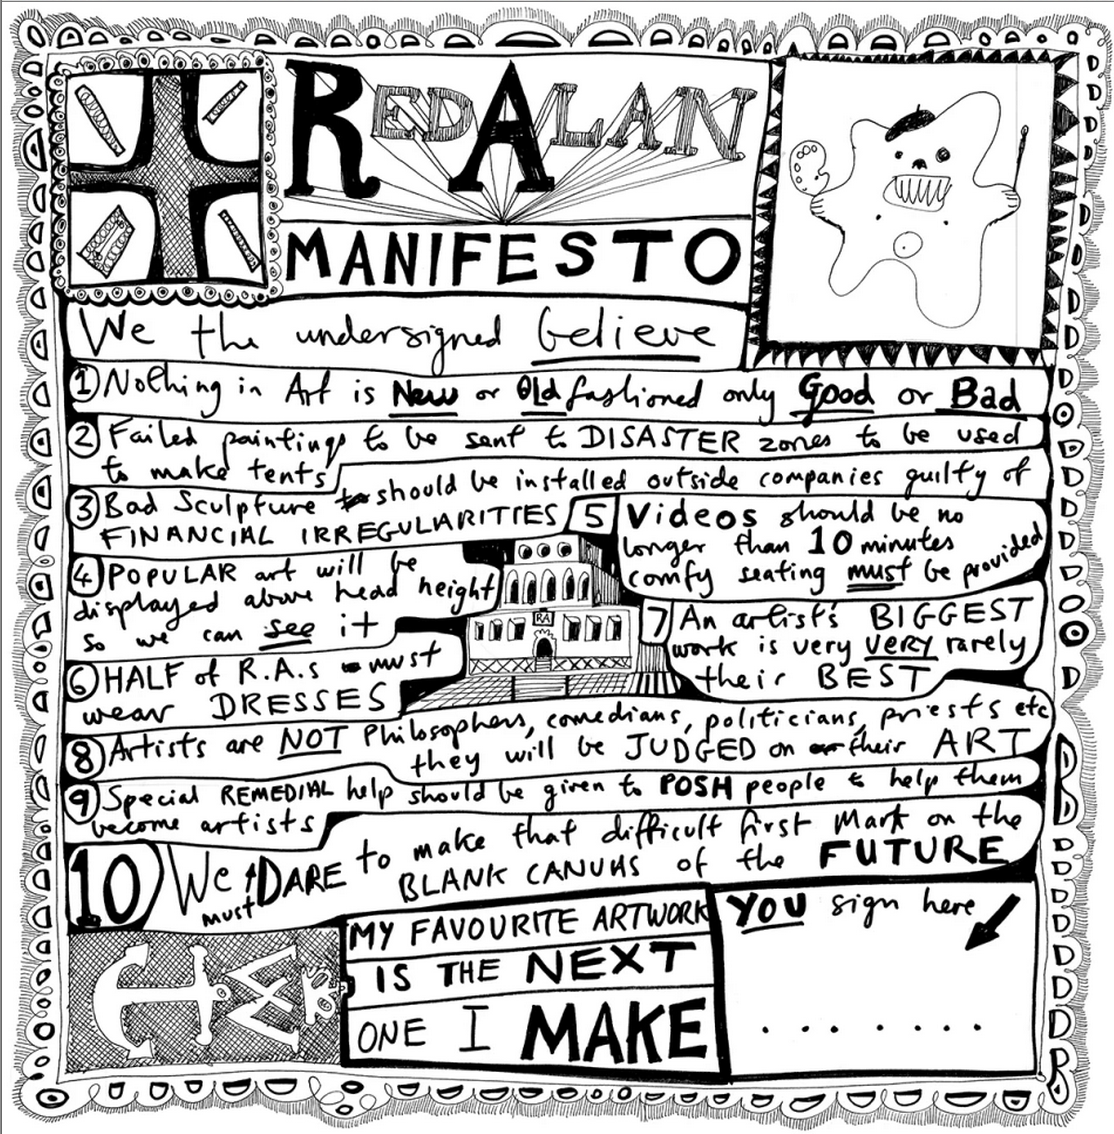 Happy birthday to Grayson Perry RA! This is Red Alan\s Manifesto produced specially for the RA  